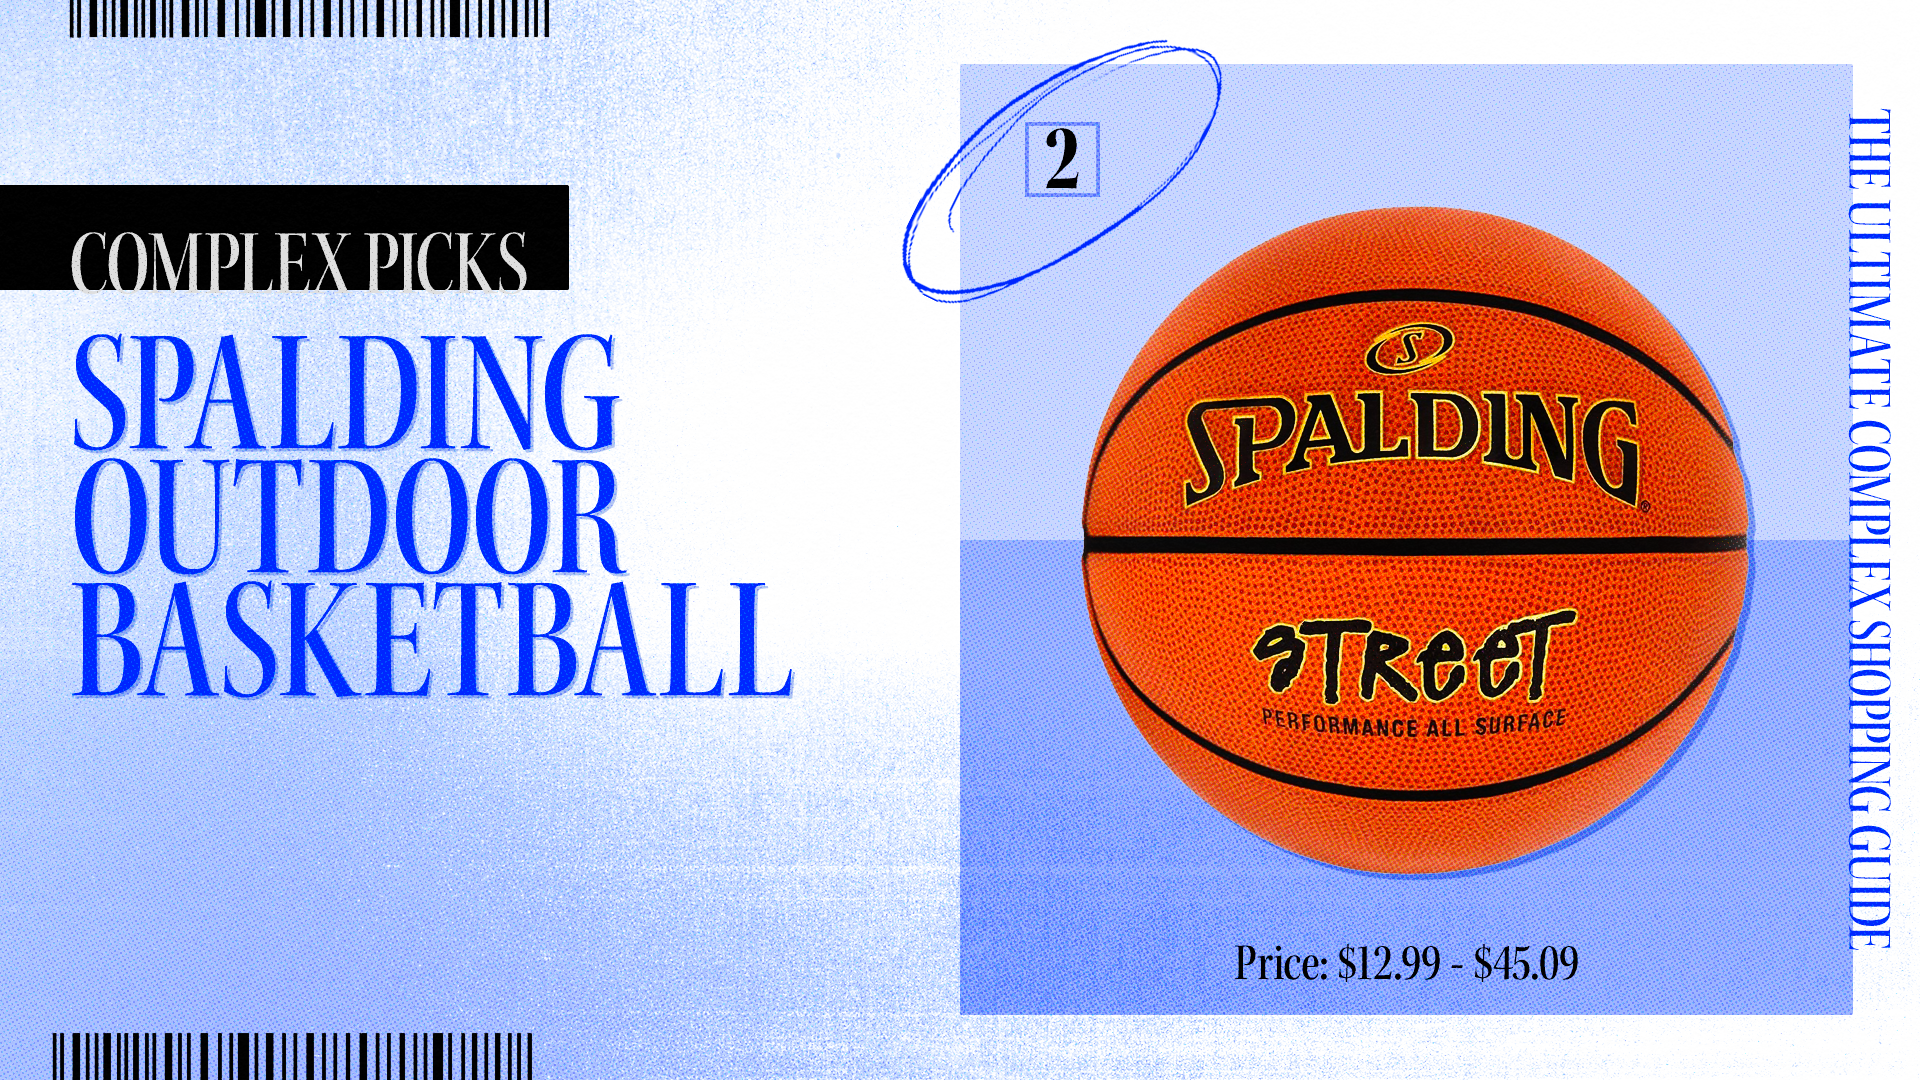 Advertisement for a Spalding Outdoor Basketball in Complex Picks, showing the basketball with price range $12.99-$45.09, part of The Ultimate Complex Shopping Guide